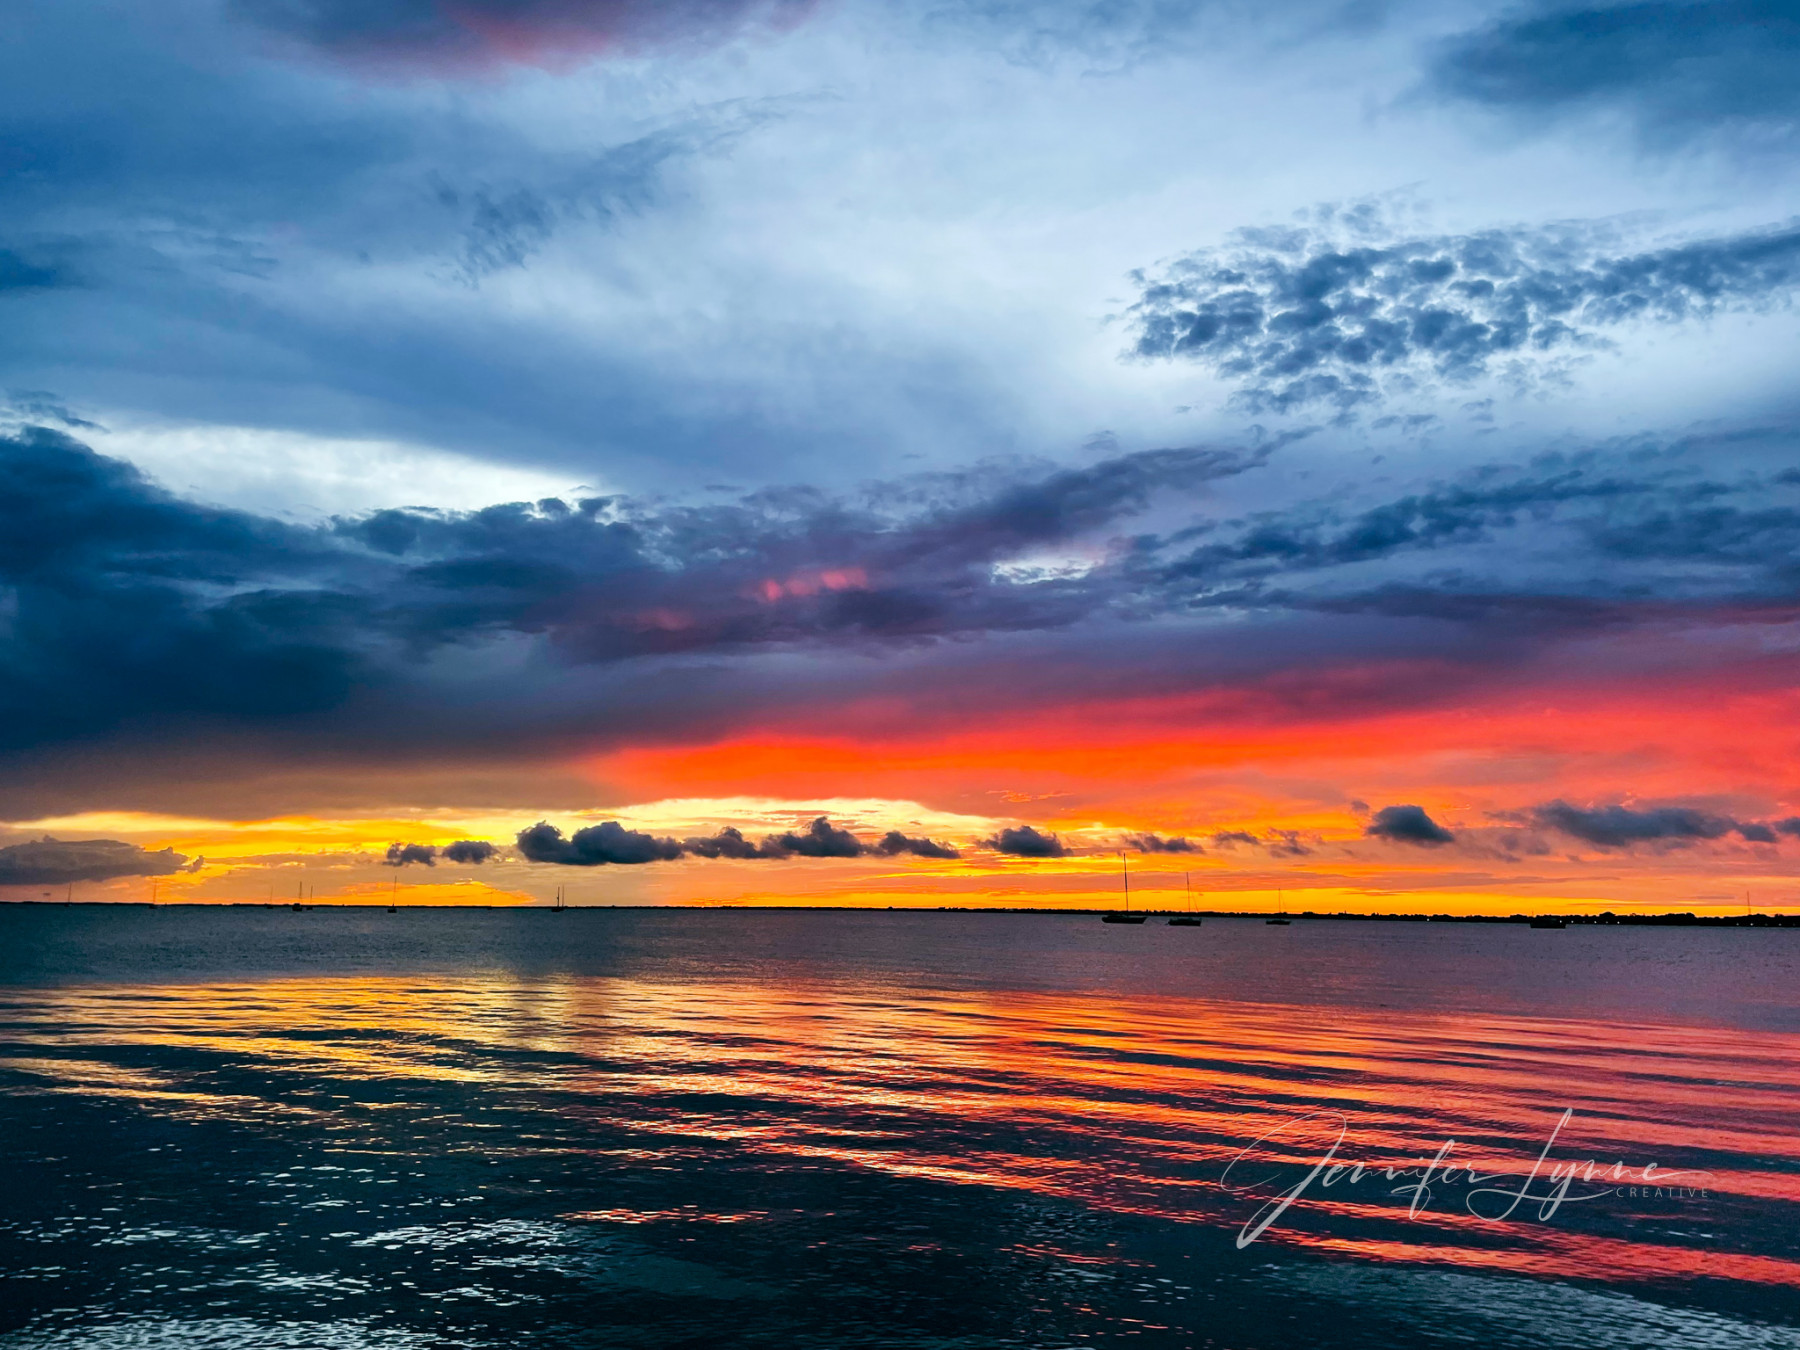 Hemophilia News Today | A photo by the author of a beautiful sunset sunset over the water at Punta Gorda, Florida. The photo displays vivid blues, oranges, and yellows.